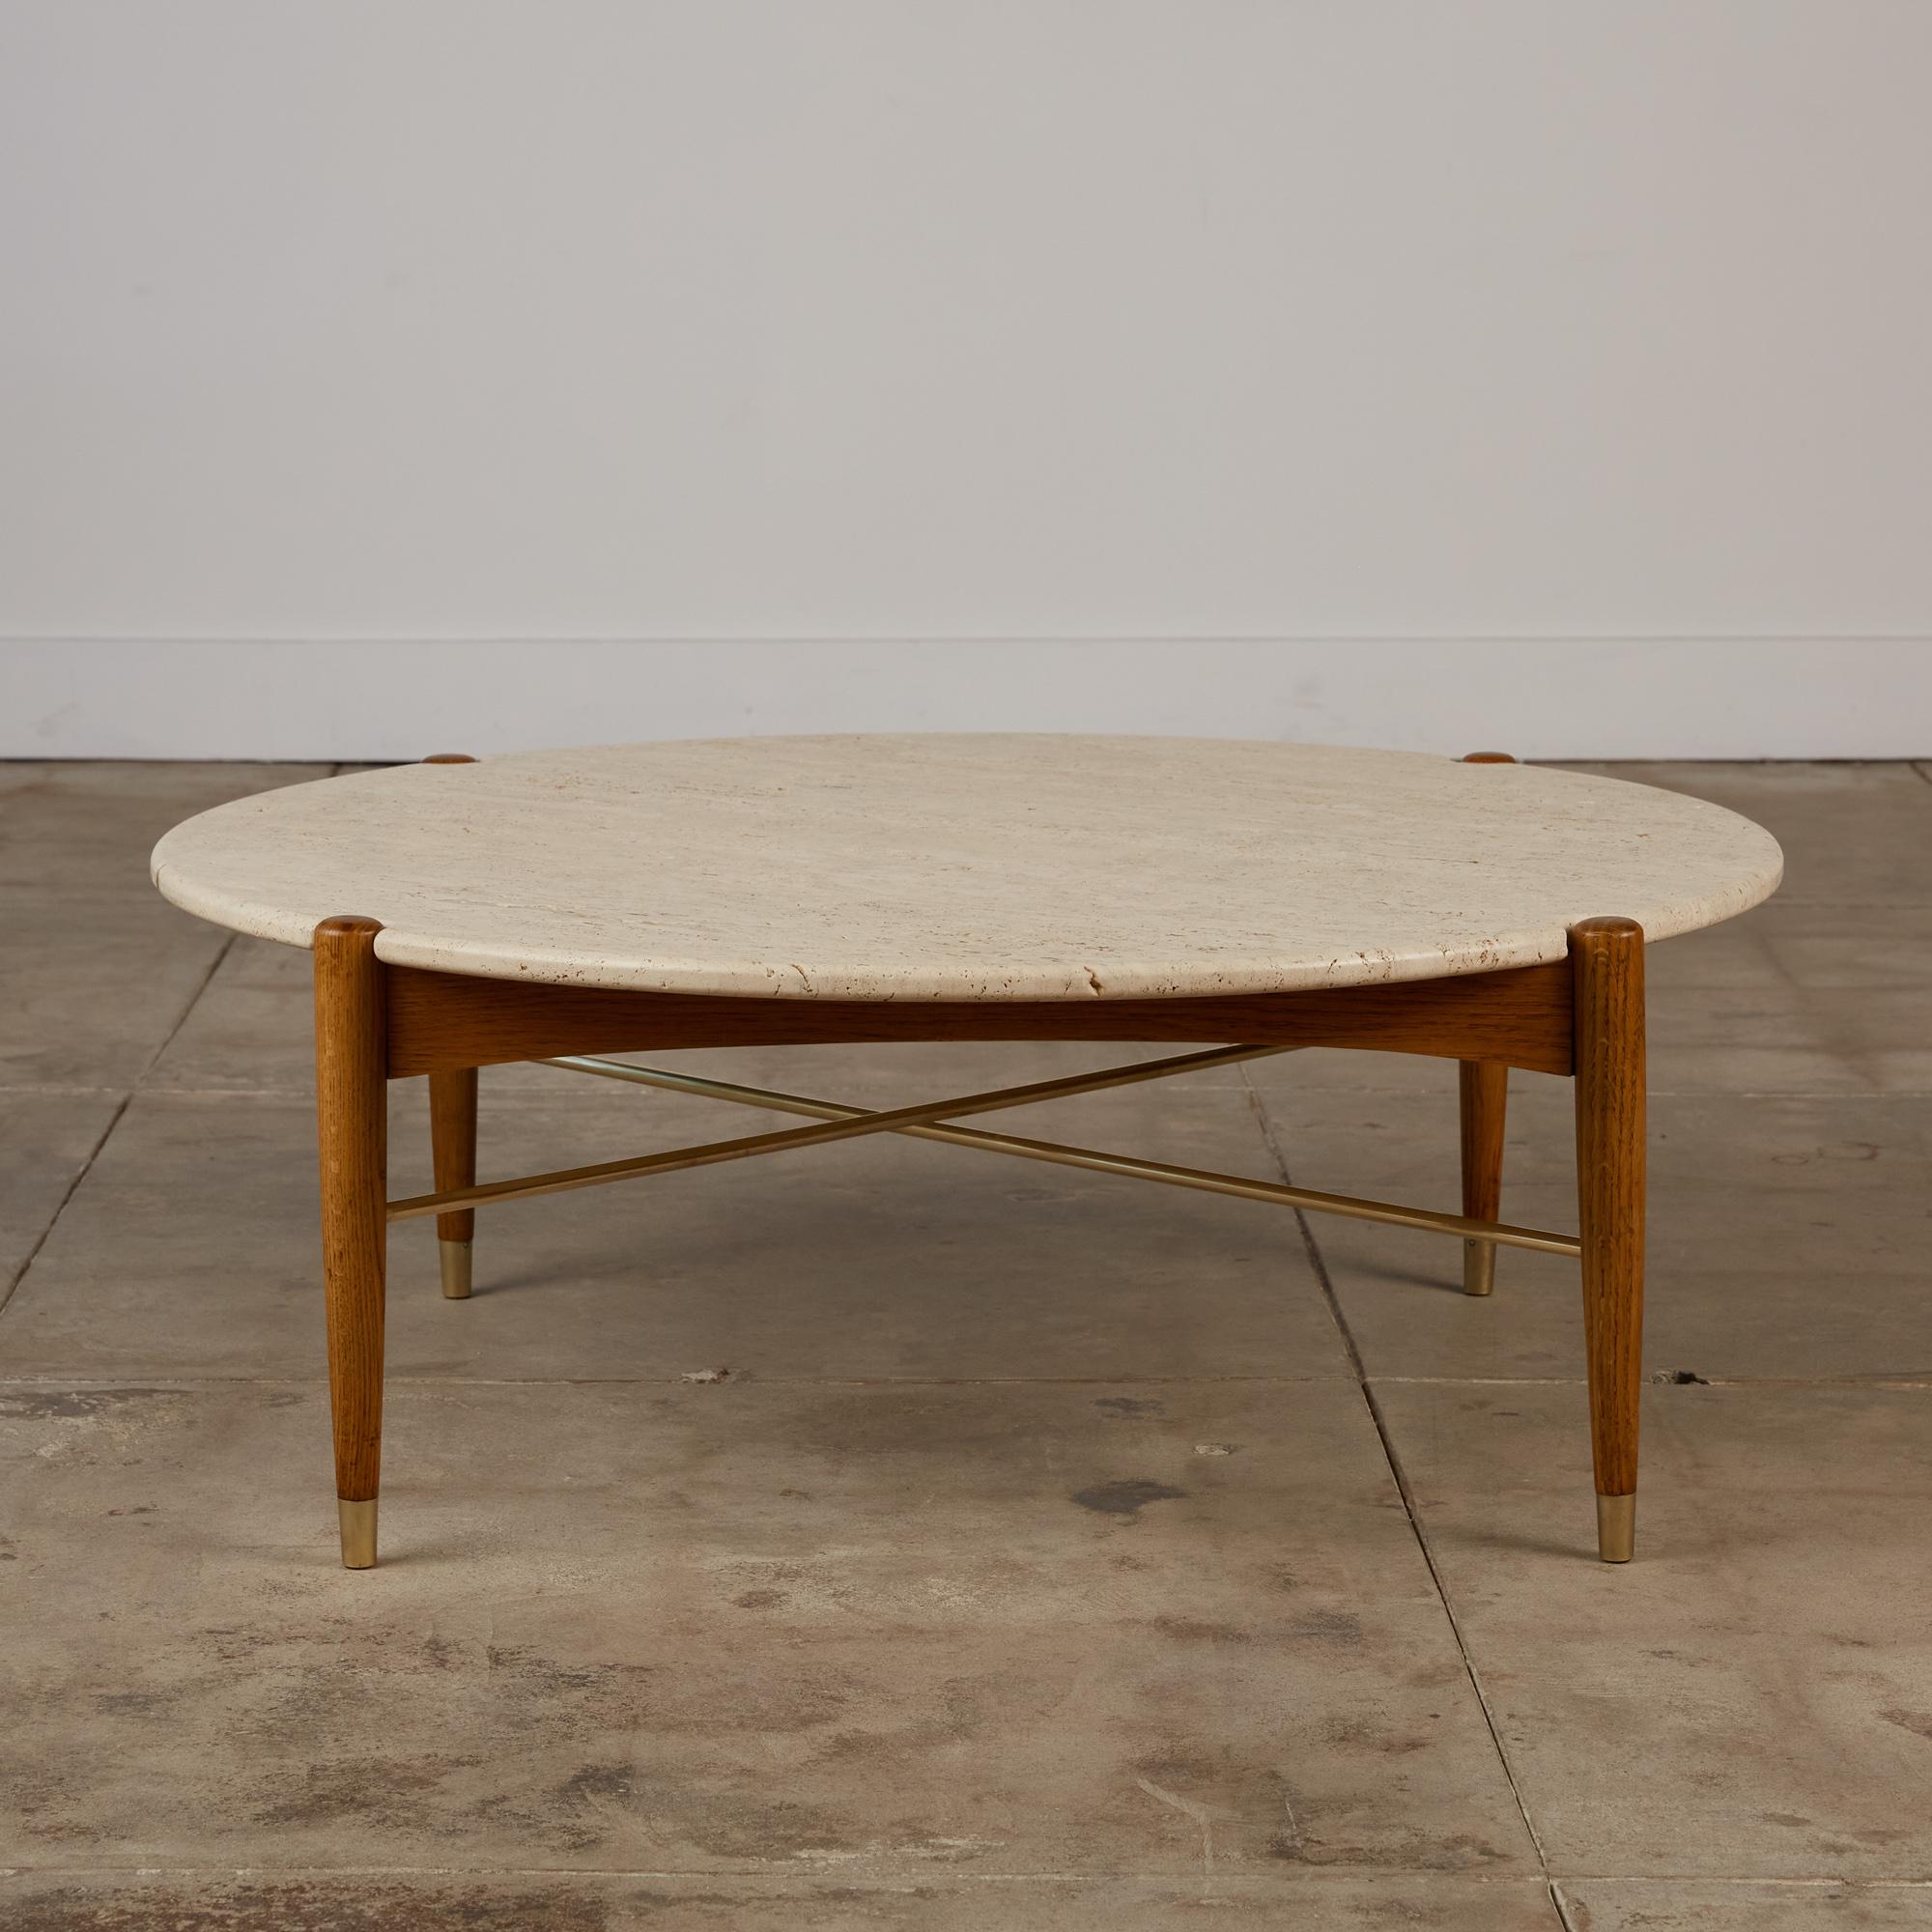 Travertine coffee table by Folke Ohlsson for DUX, Sweden. c.1960s. The table features a round oak base and brass X-stretcher. The rounded edge travertine top is crafted to sit perfectly on top of the base to show the tops of the legs. The legs peek